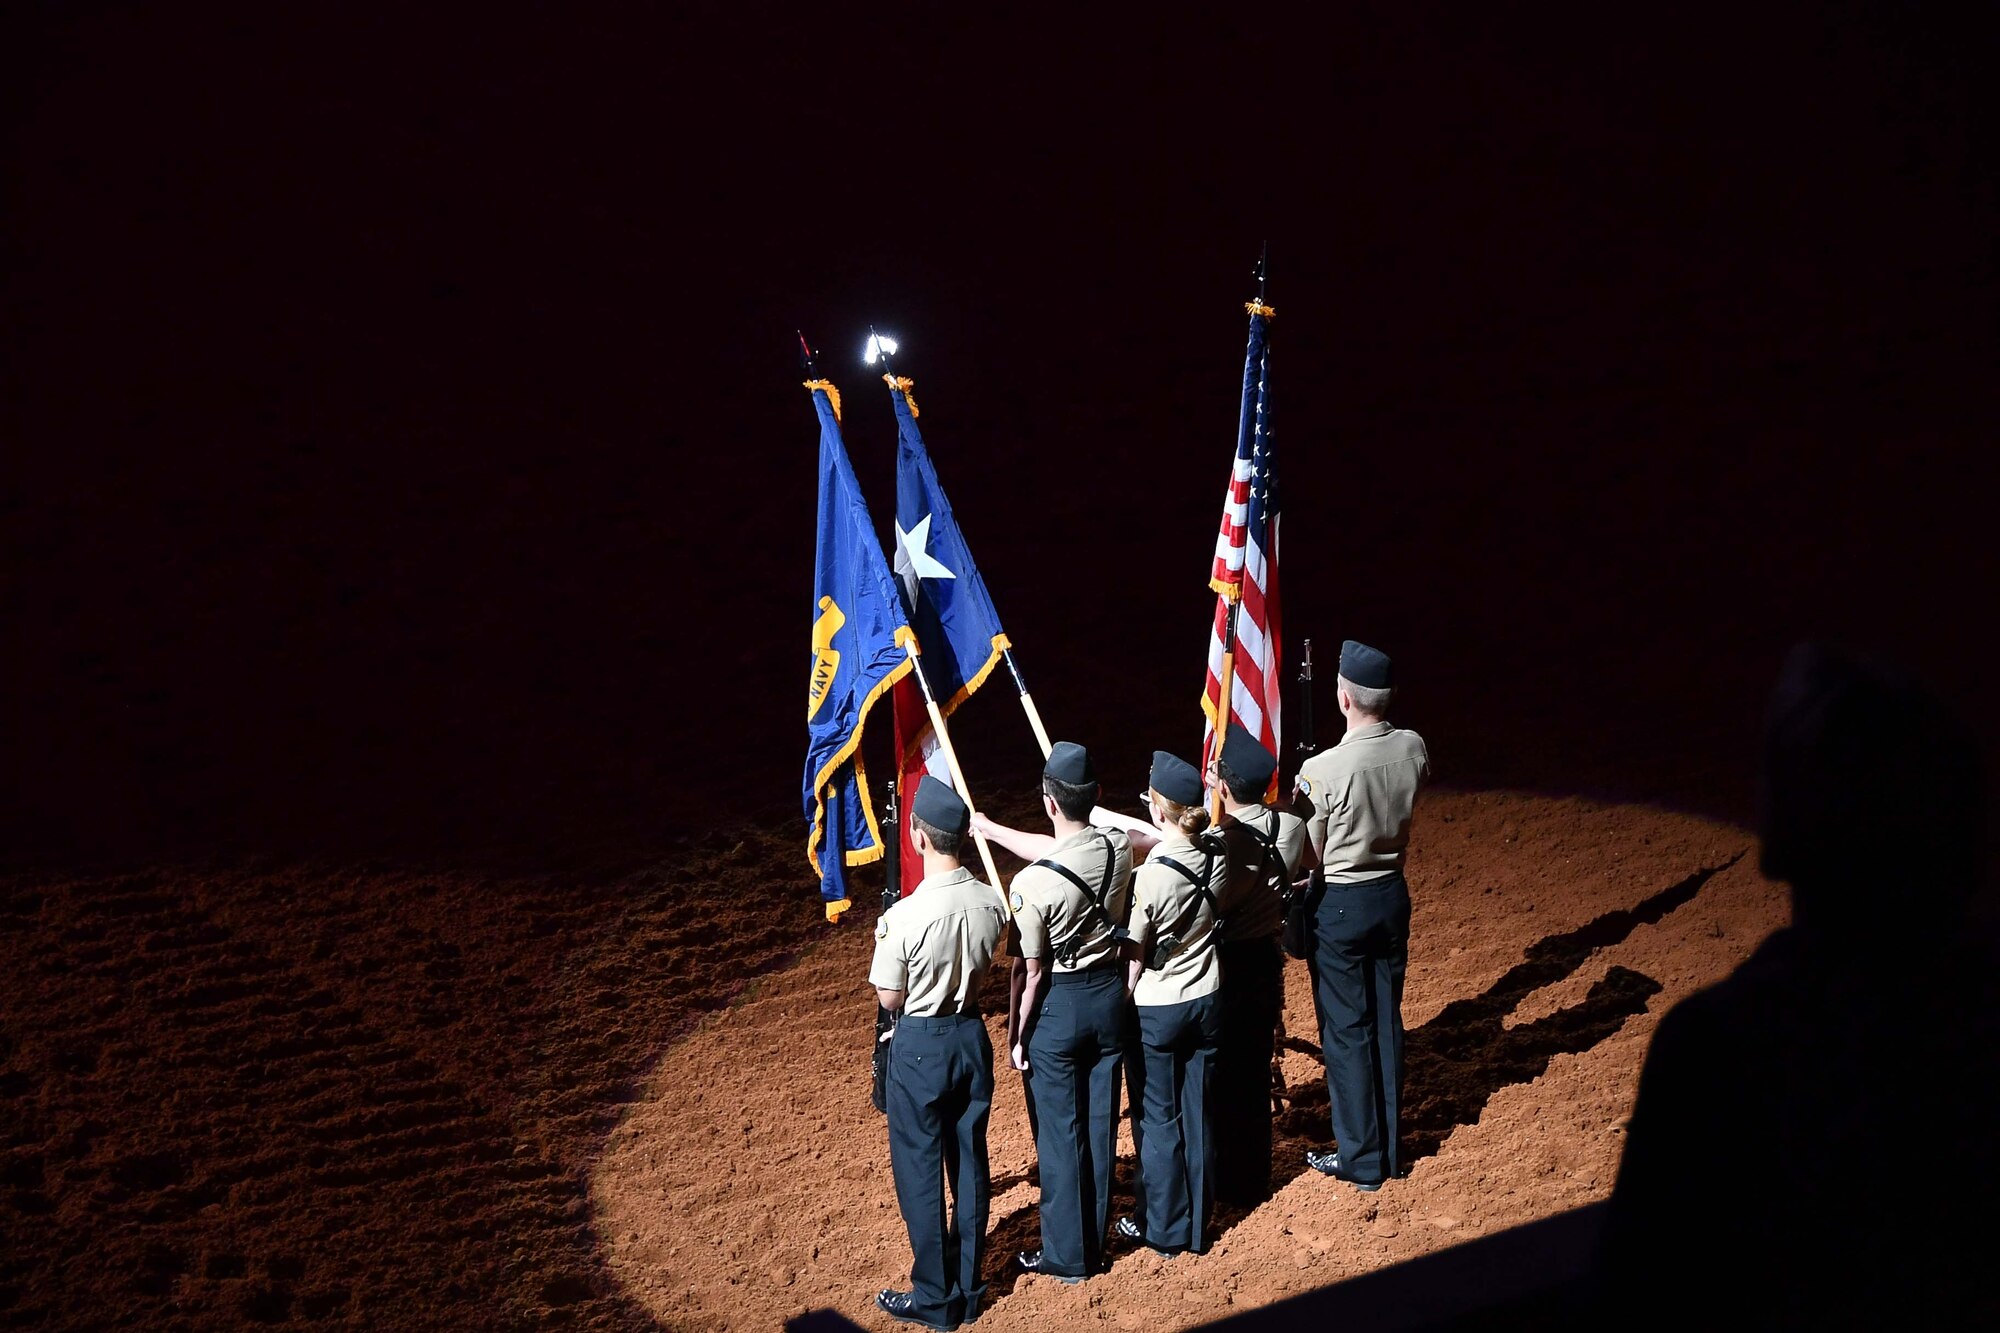 U.S. Navy JROTC cadets from Joshua High School, Joshua, Texas post the colors as the crowd sings the U.S. national anthem during the Military Appreciation Day at the Fort Worth Stock Show and Rodeo at Dickie’s Arena on February 3, 2020. Prior to the rodeo events, each military branch was announced and veterans past and present were asked to stand and be recognized. (U.S. Air Force Photo by Master Sgt. Jeremy Roman)